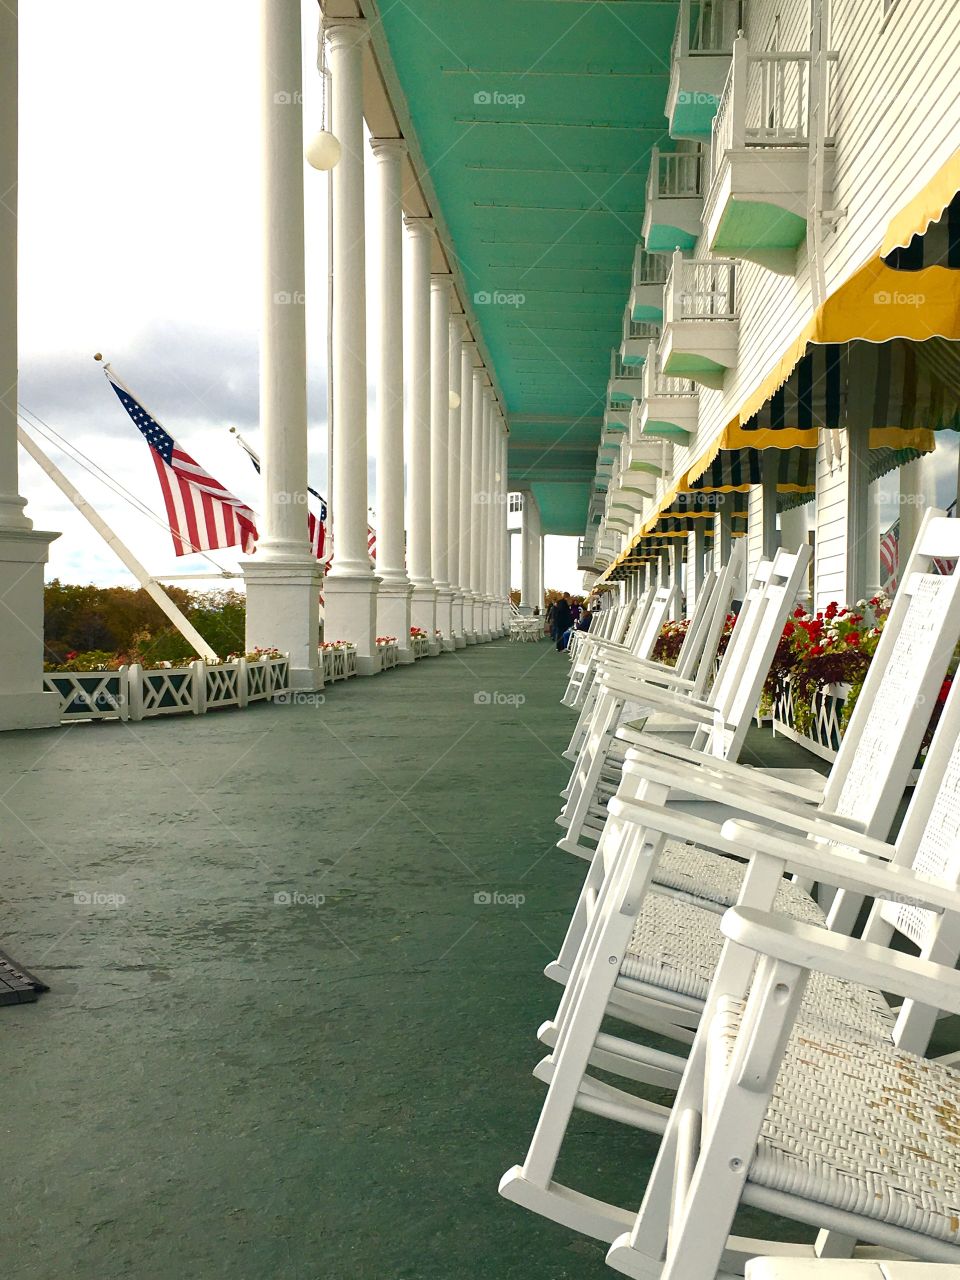 The closing of The Grand Hotel, longest porch in the world.